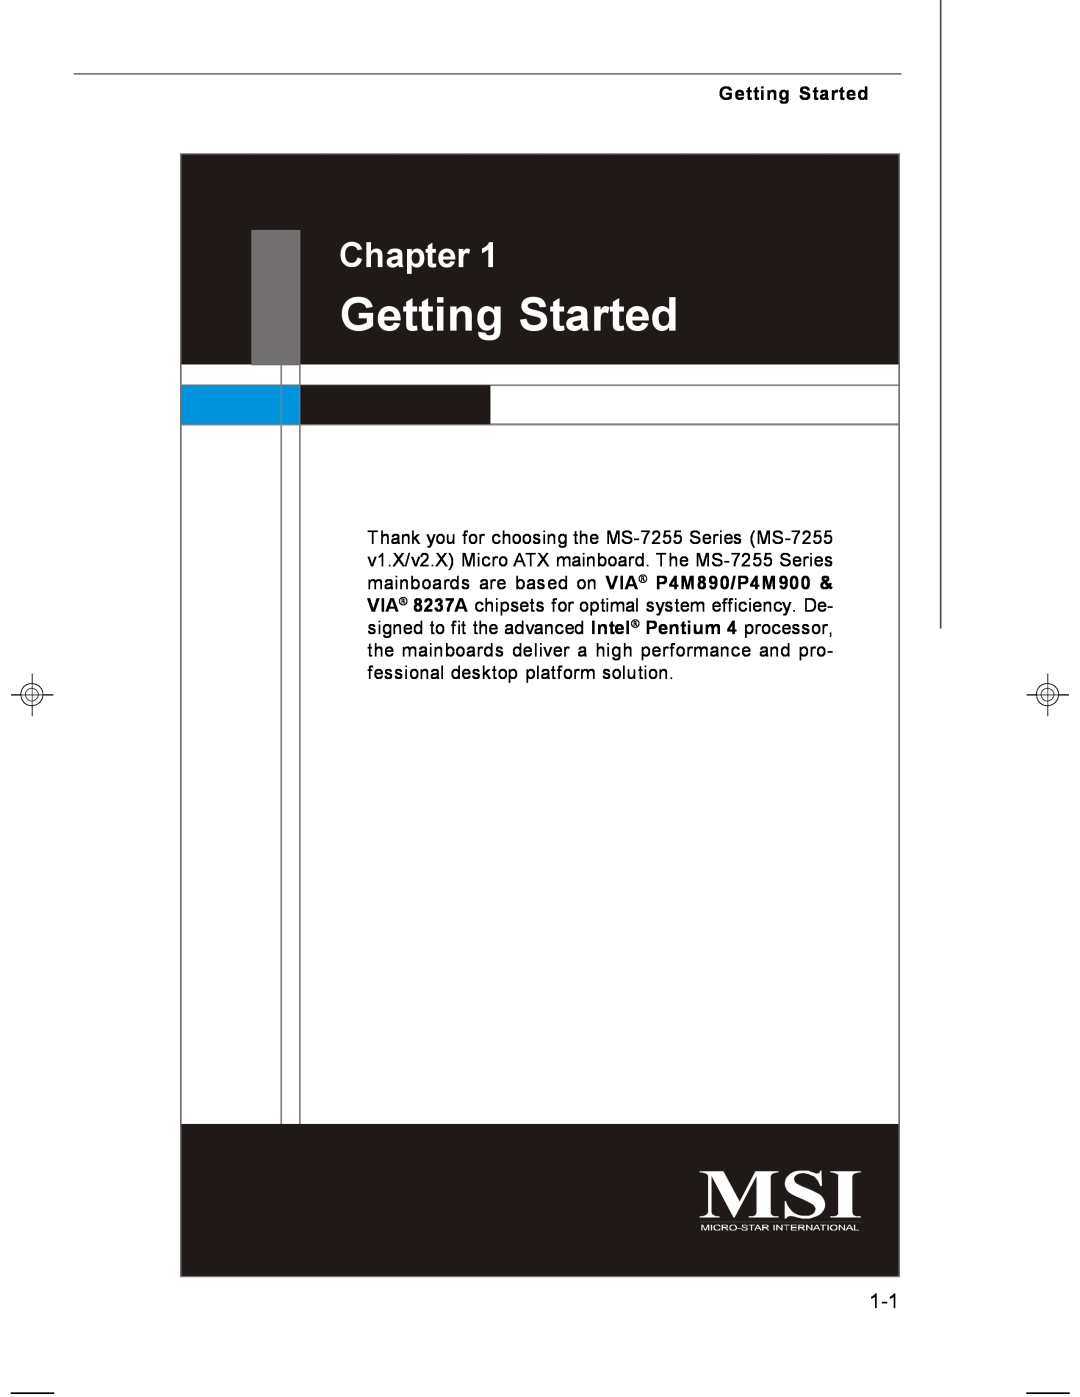 MSI MS-7255 manual Getting Started, Chapter 